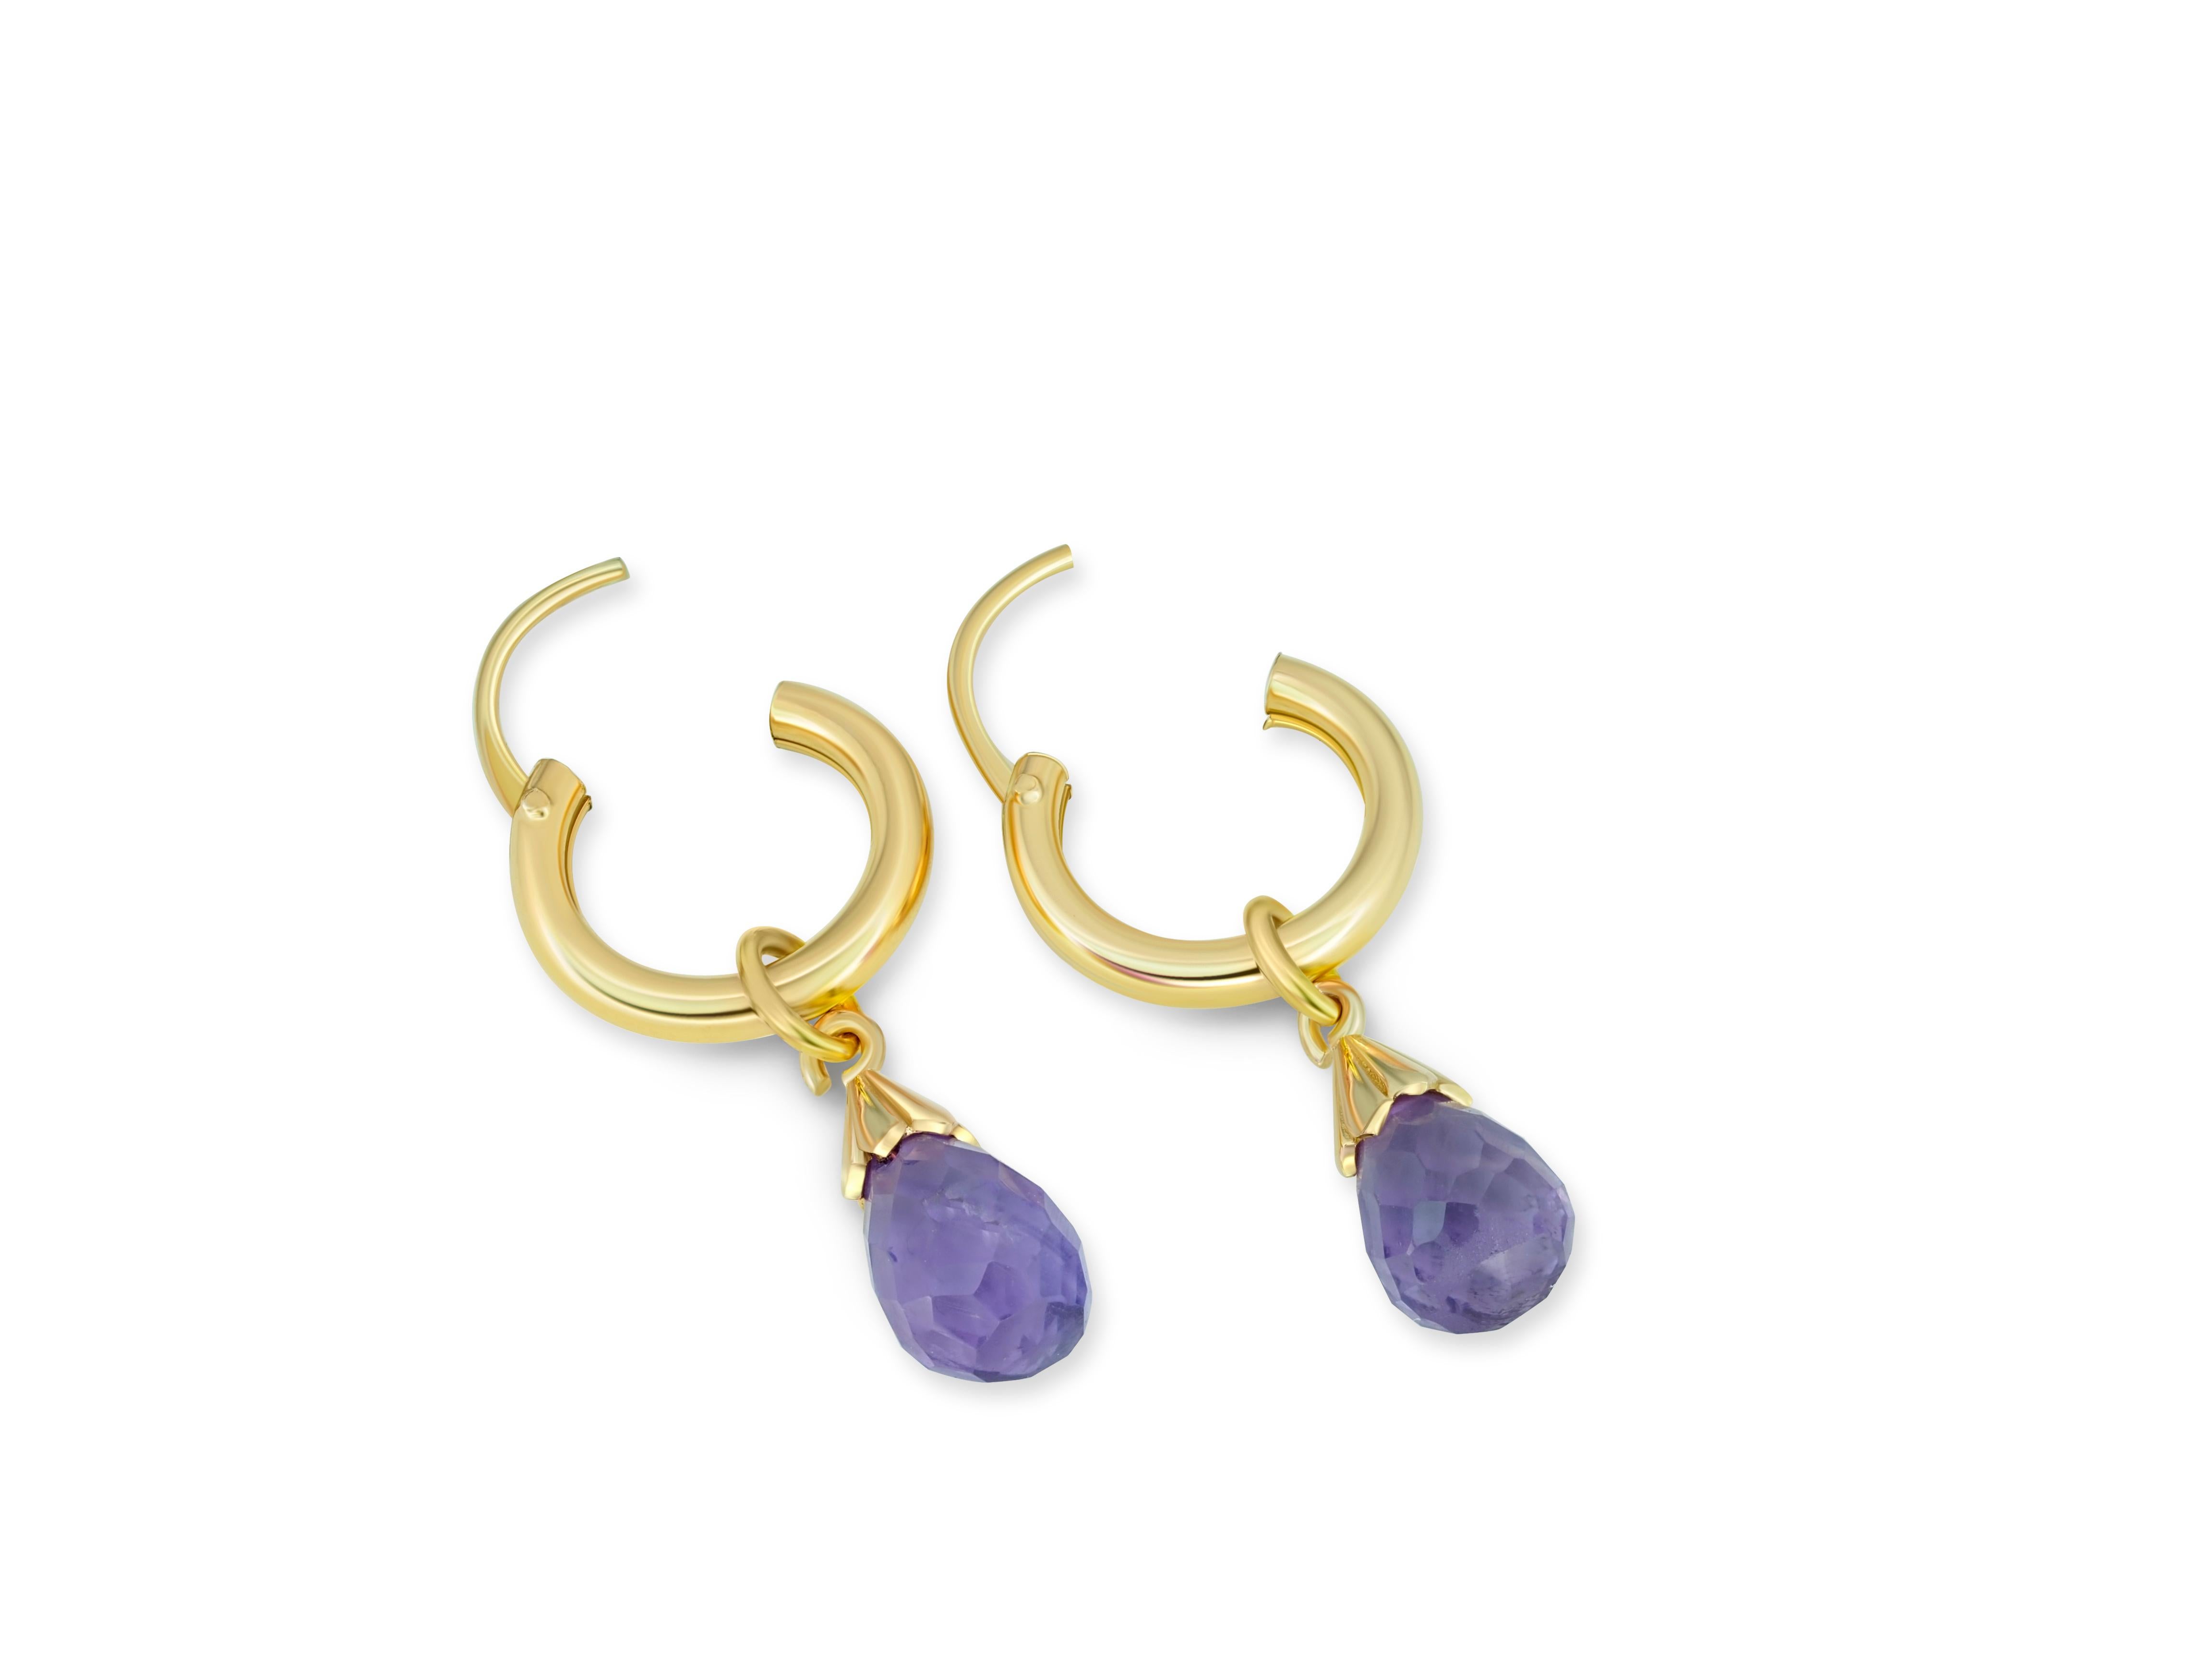 Hoop Earrings and Amethyst Briolette Charms in 14k Gold For Sale 2